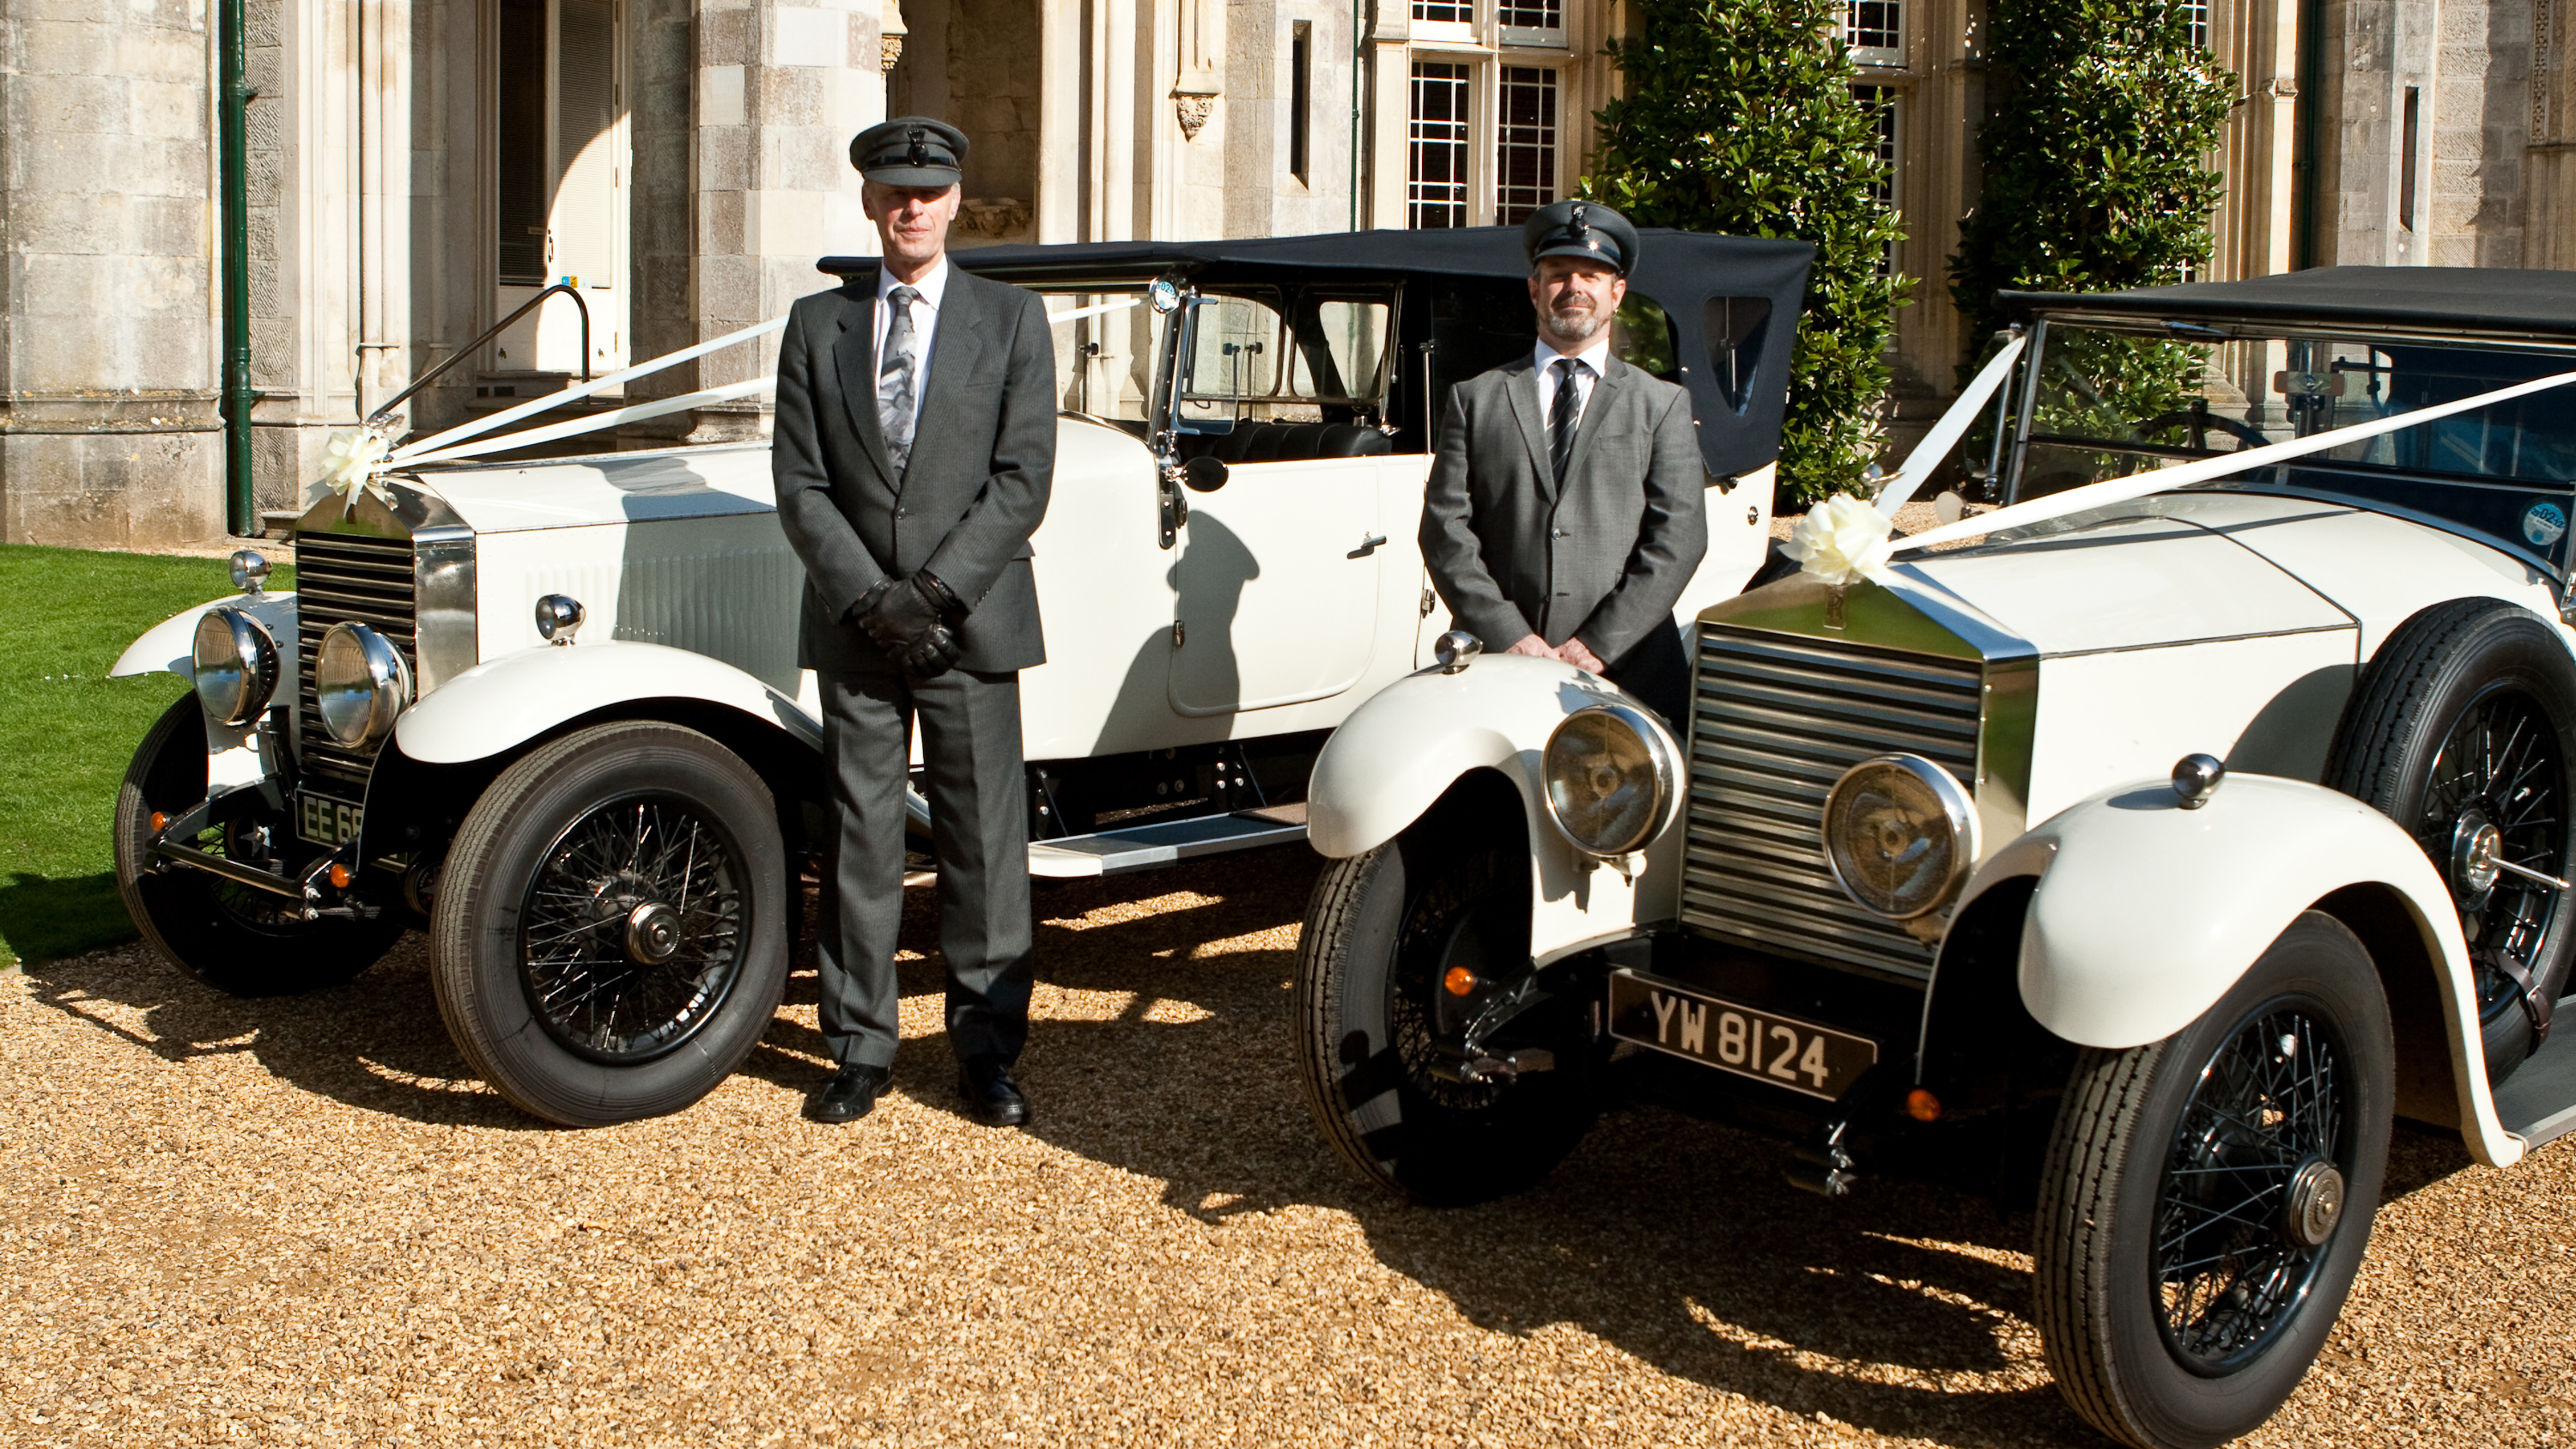 Two vintage wedding cars decorated with white ribbons and bows at a local Studland wedding. Both vehicles are parked side-by-side with their chauffeurs next to them.